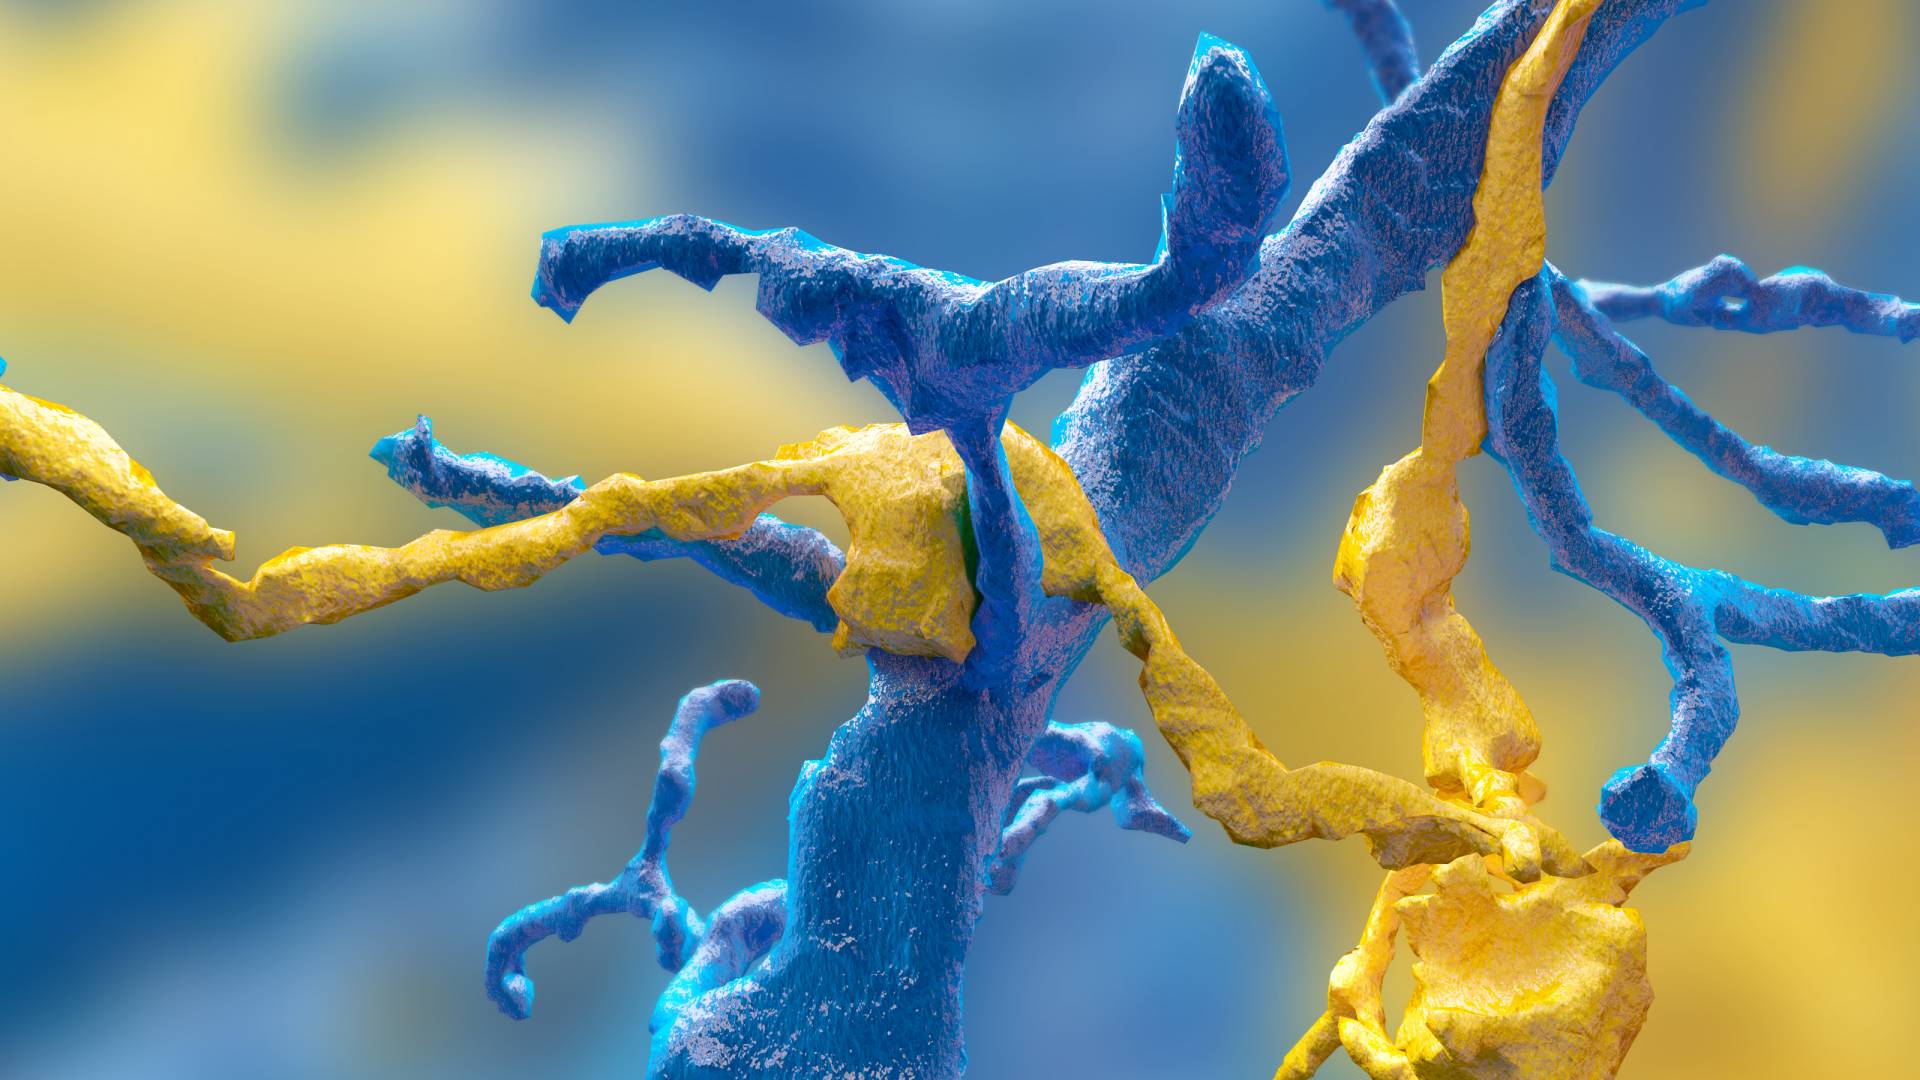 Synapse between a ganglion neuron (blue) and a starburst amacrine cell (yellow) mapped by Eyewire gamers.